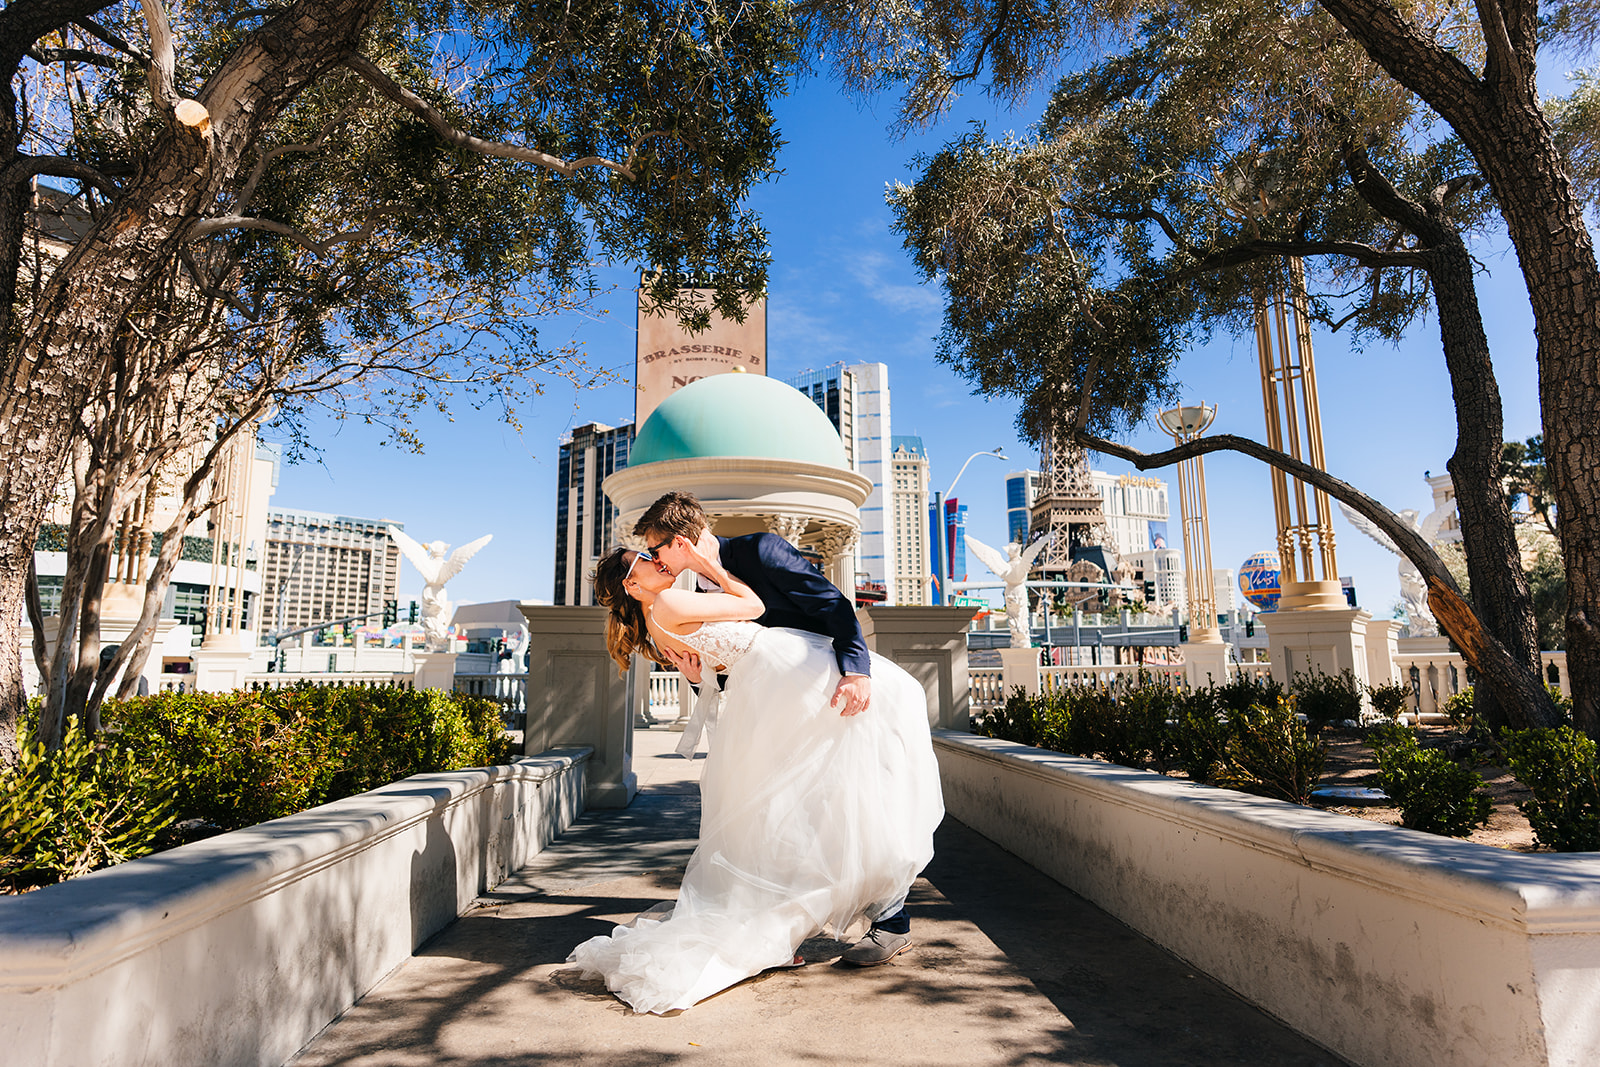 Couple sharing an intimate moment during their elopement in Las Vegas.